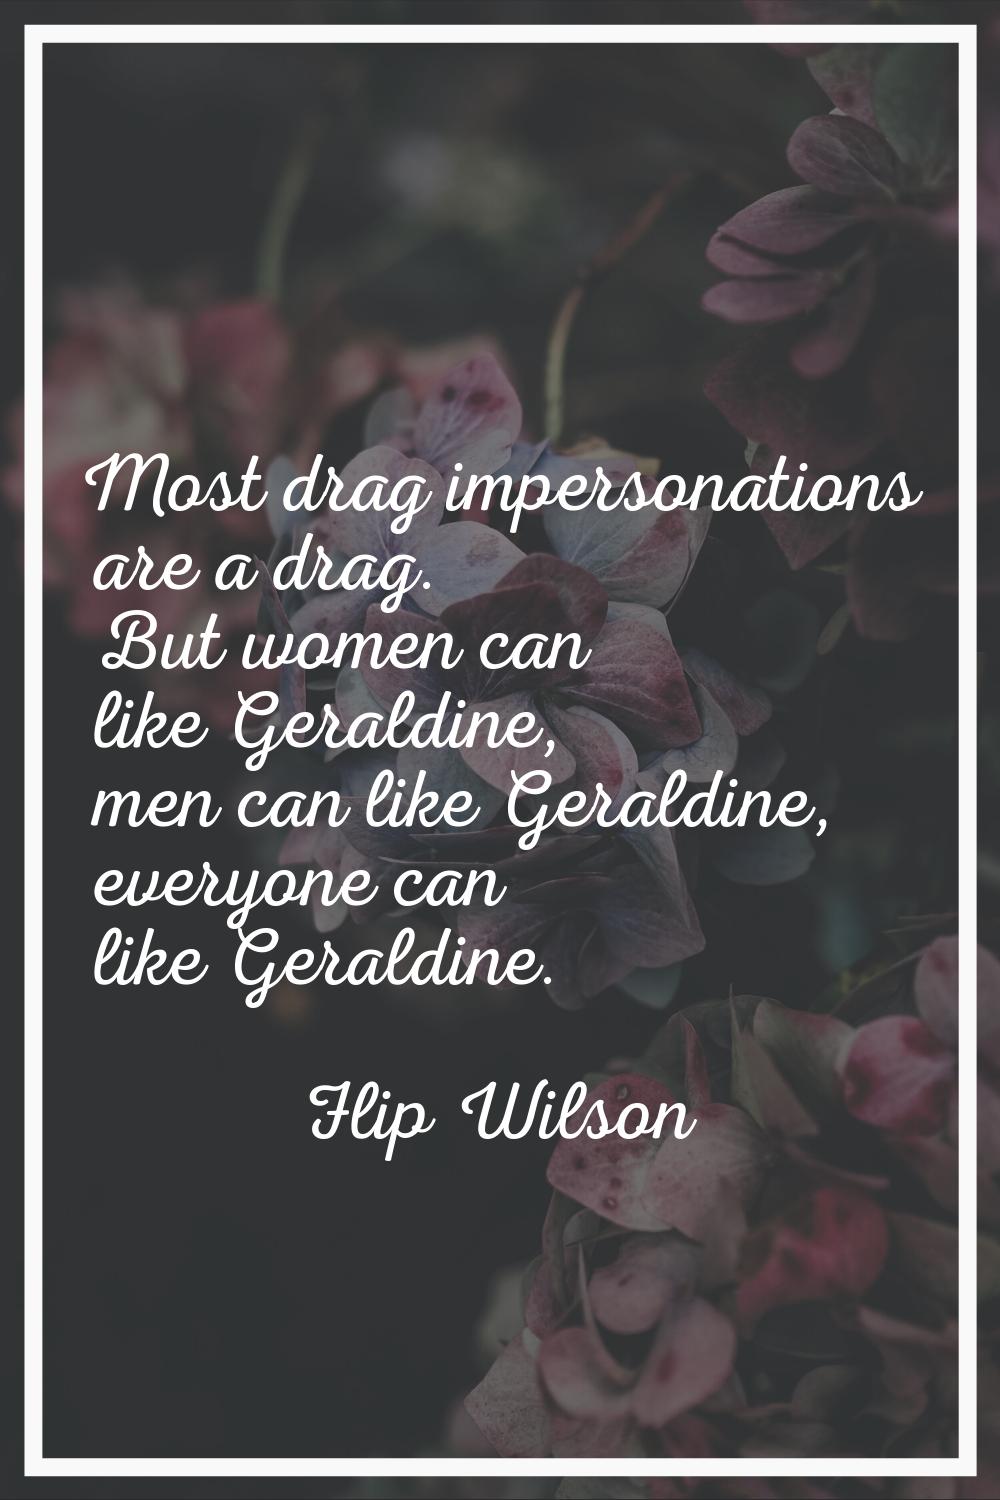 Most drag impersonations are a drag. But women can like Geraldine, men can like Geraldine, everyone